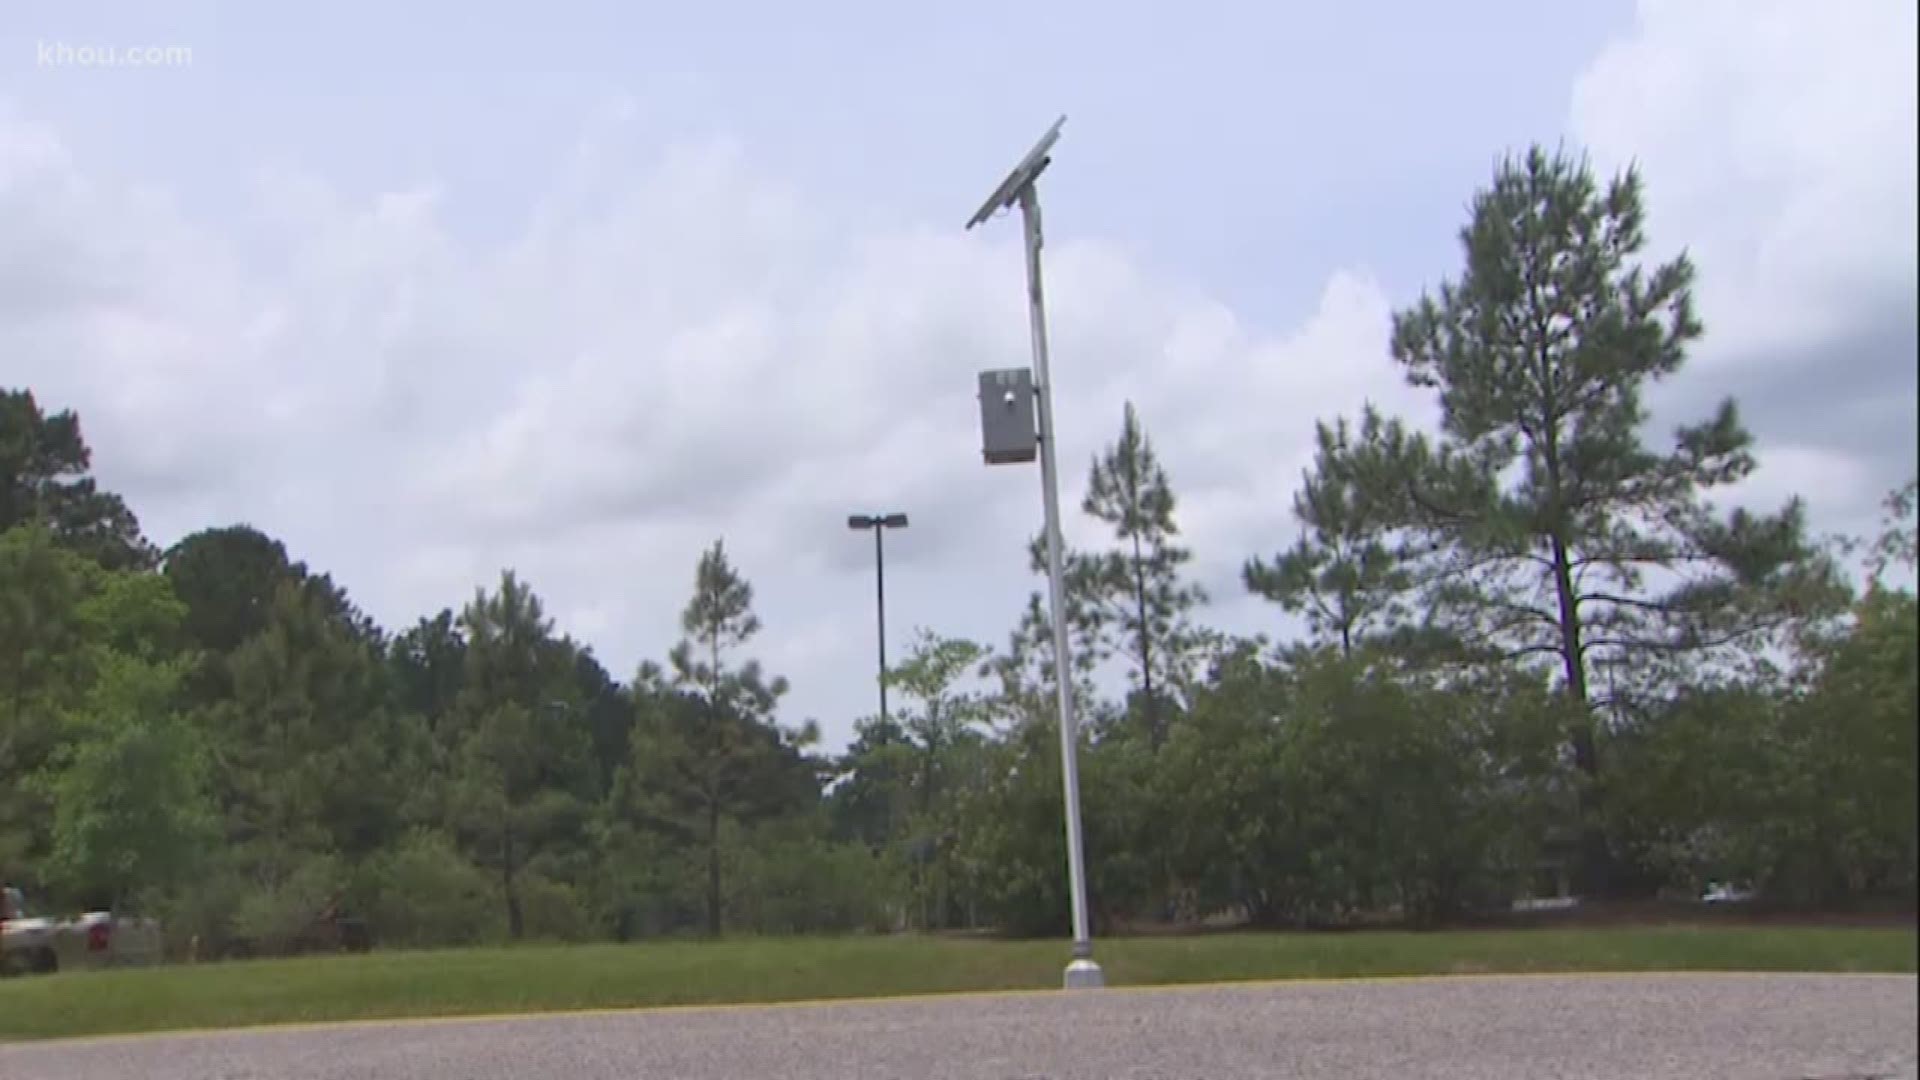 An area hit hard by Harvey is now home to a new flood warning system. Montgomery County officials hope to eventually install it all over the county. 

The system uses radars and cameras to track rising water and then sends alerts to first responders and, eventually, residents.